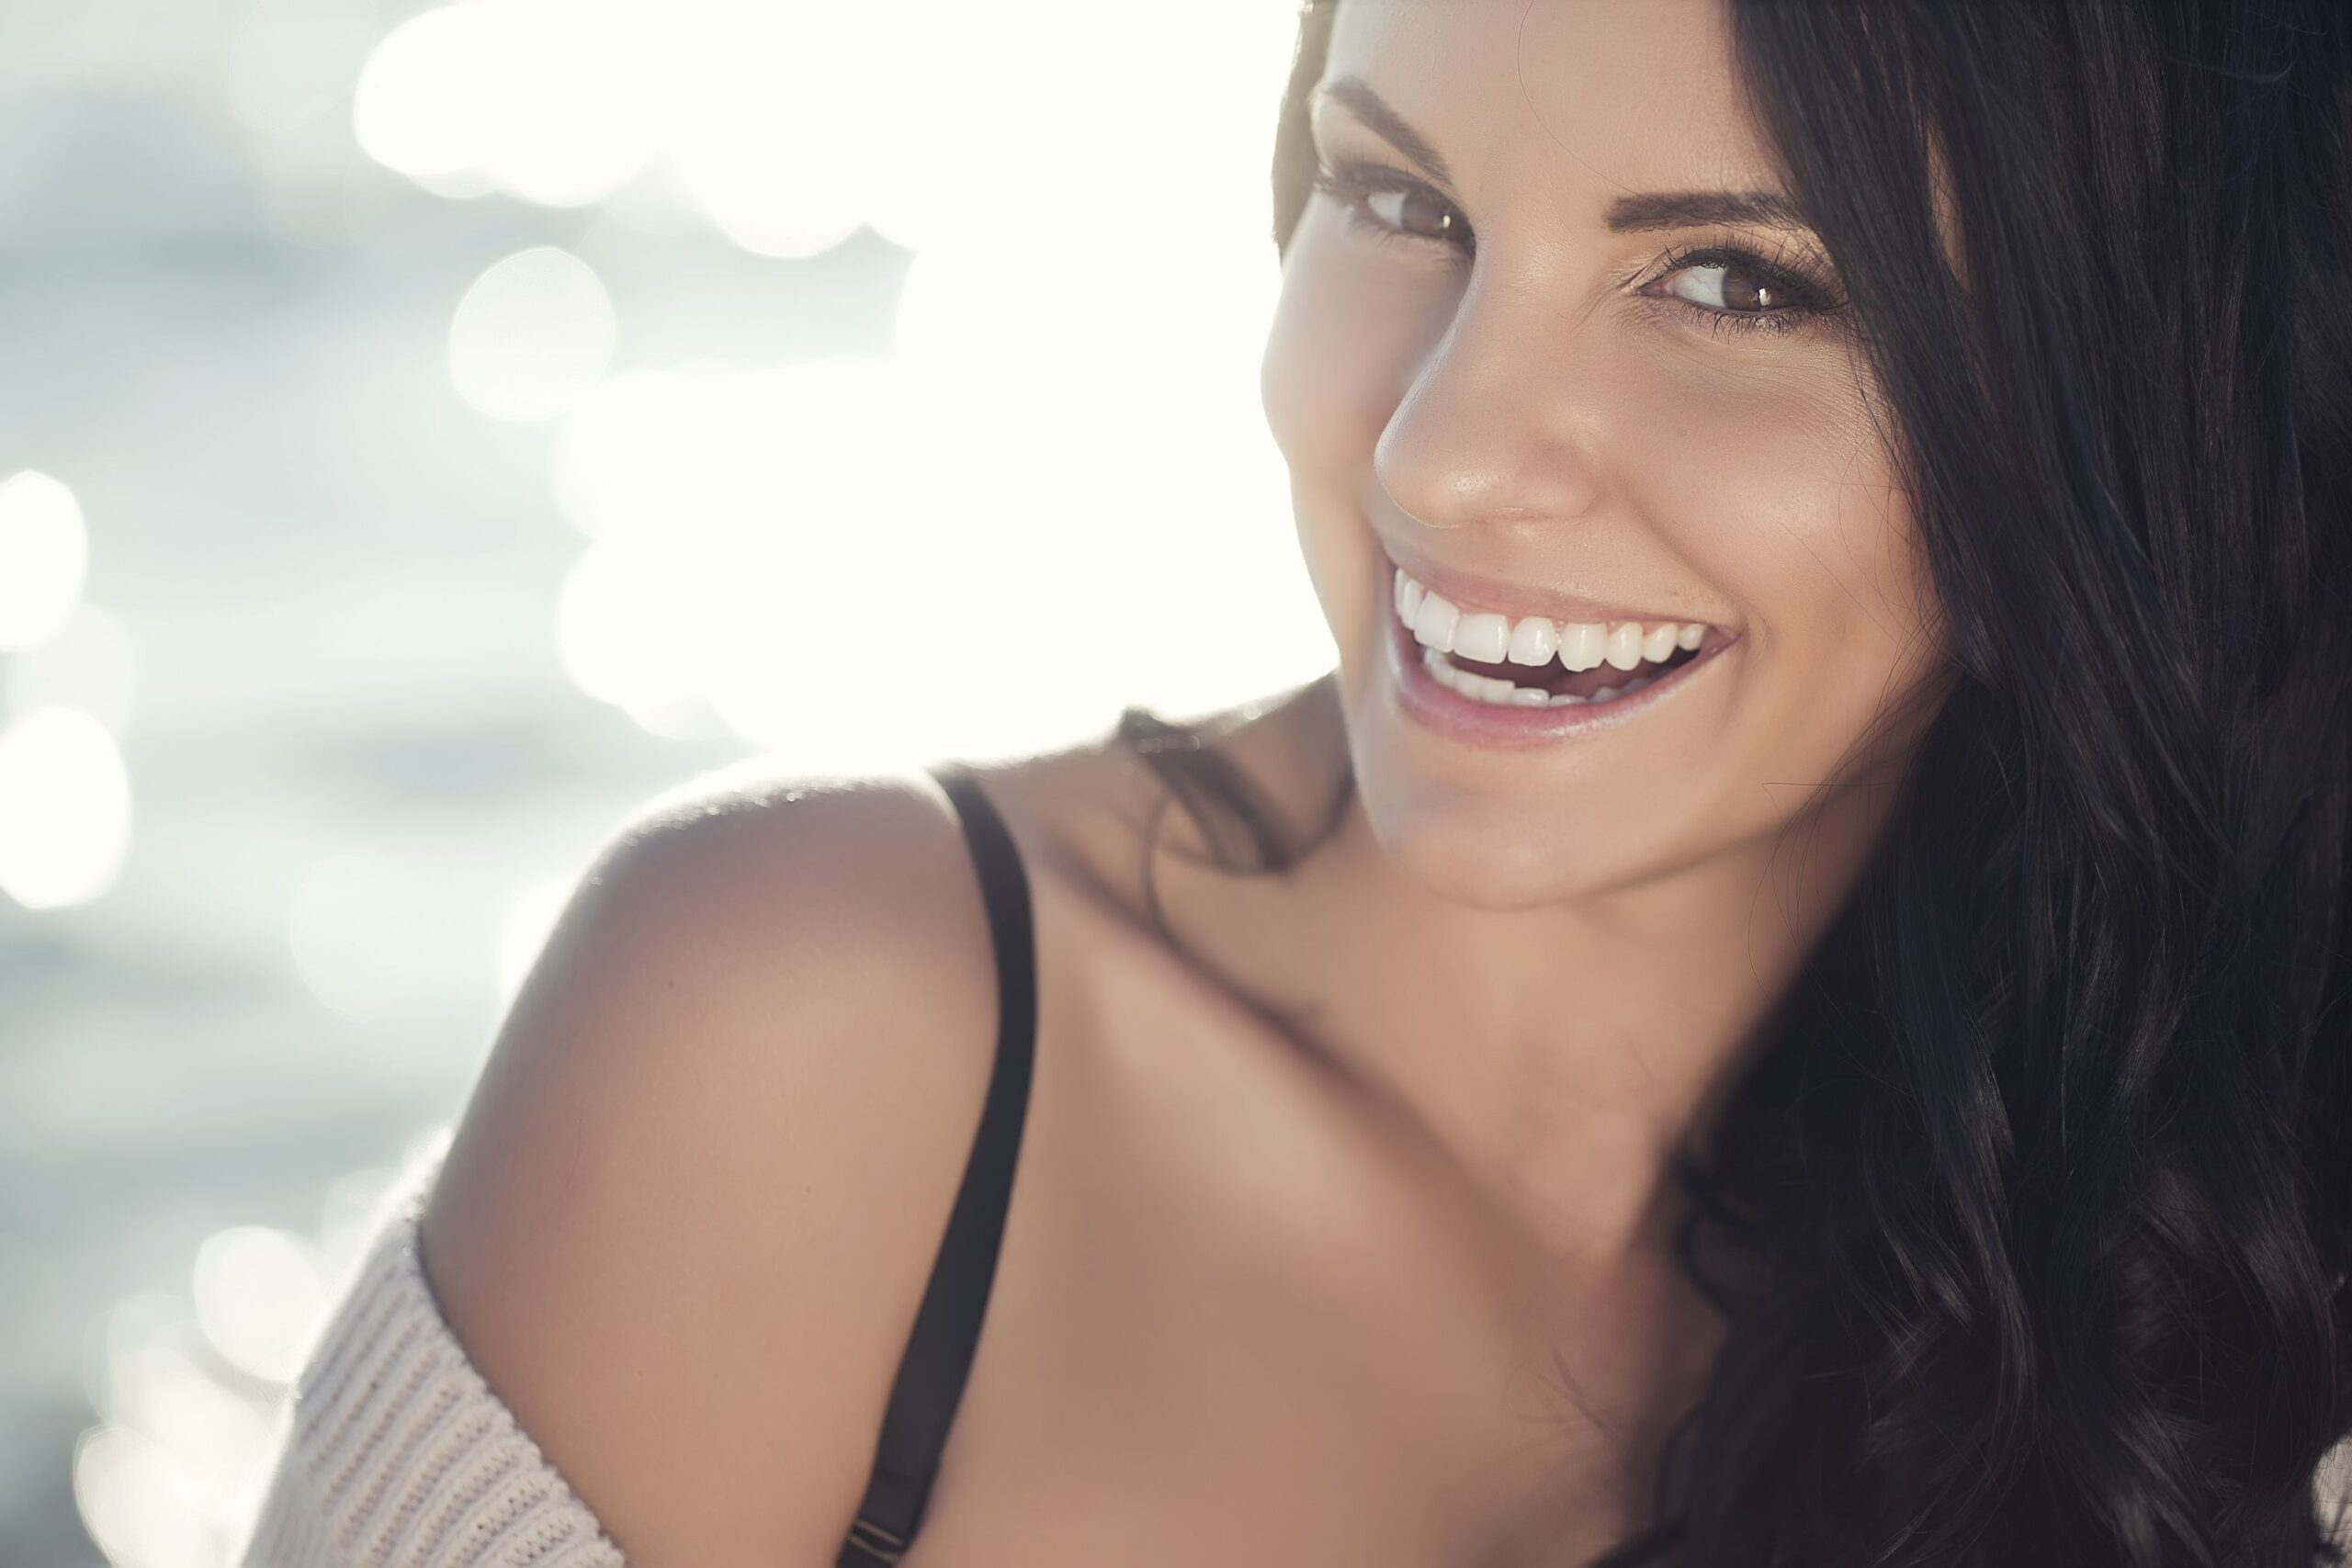 A woman smiling broadly because she has taken years off her appearance through facial plastic surgery